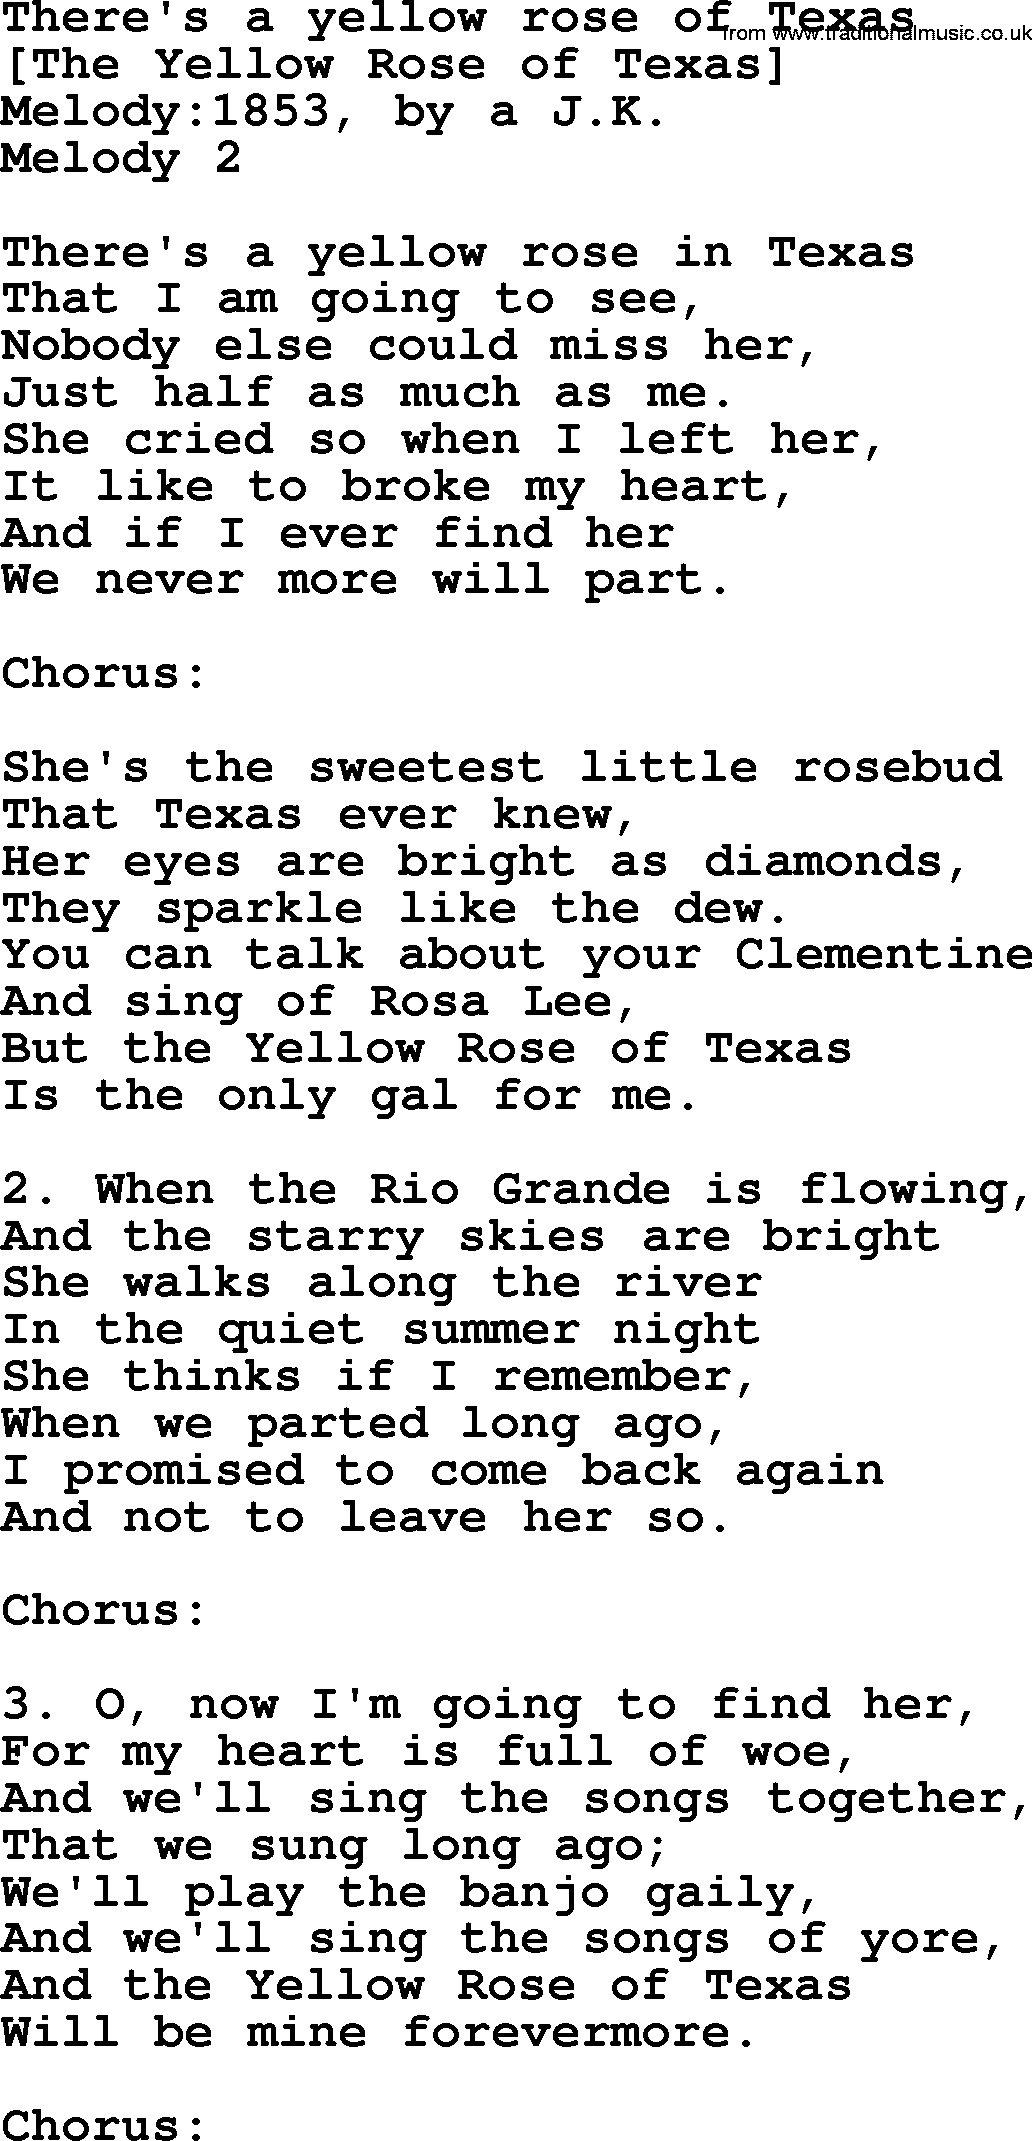 Old American Song: There's A Yellow Rose Of Texas, lyrics